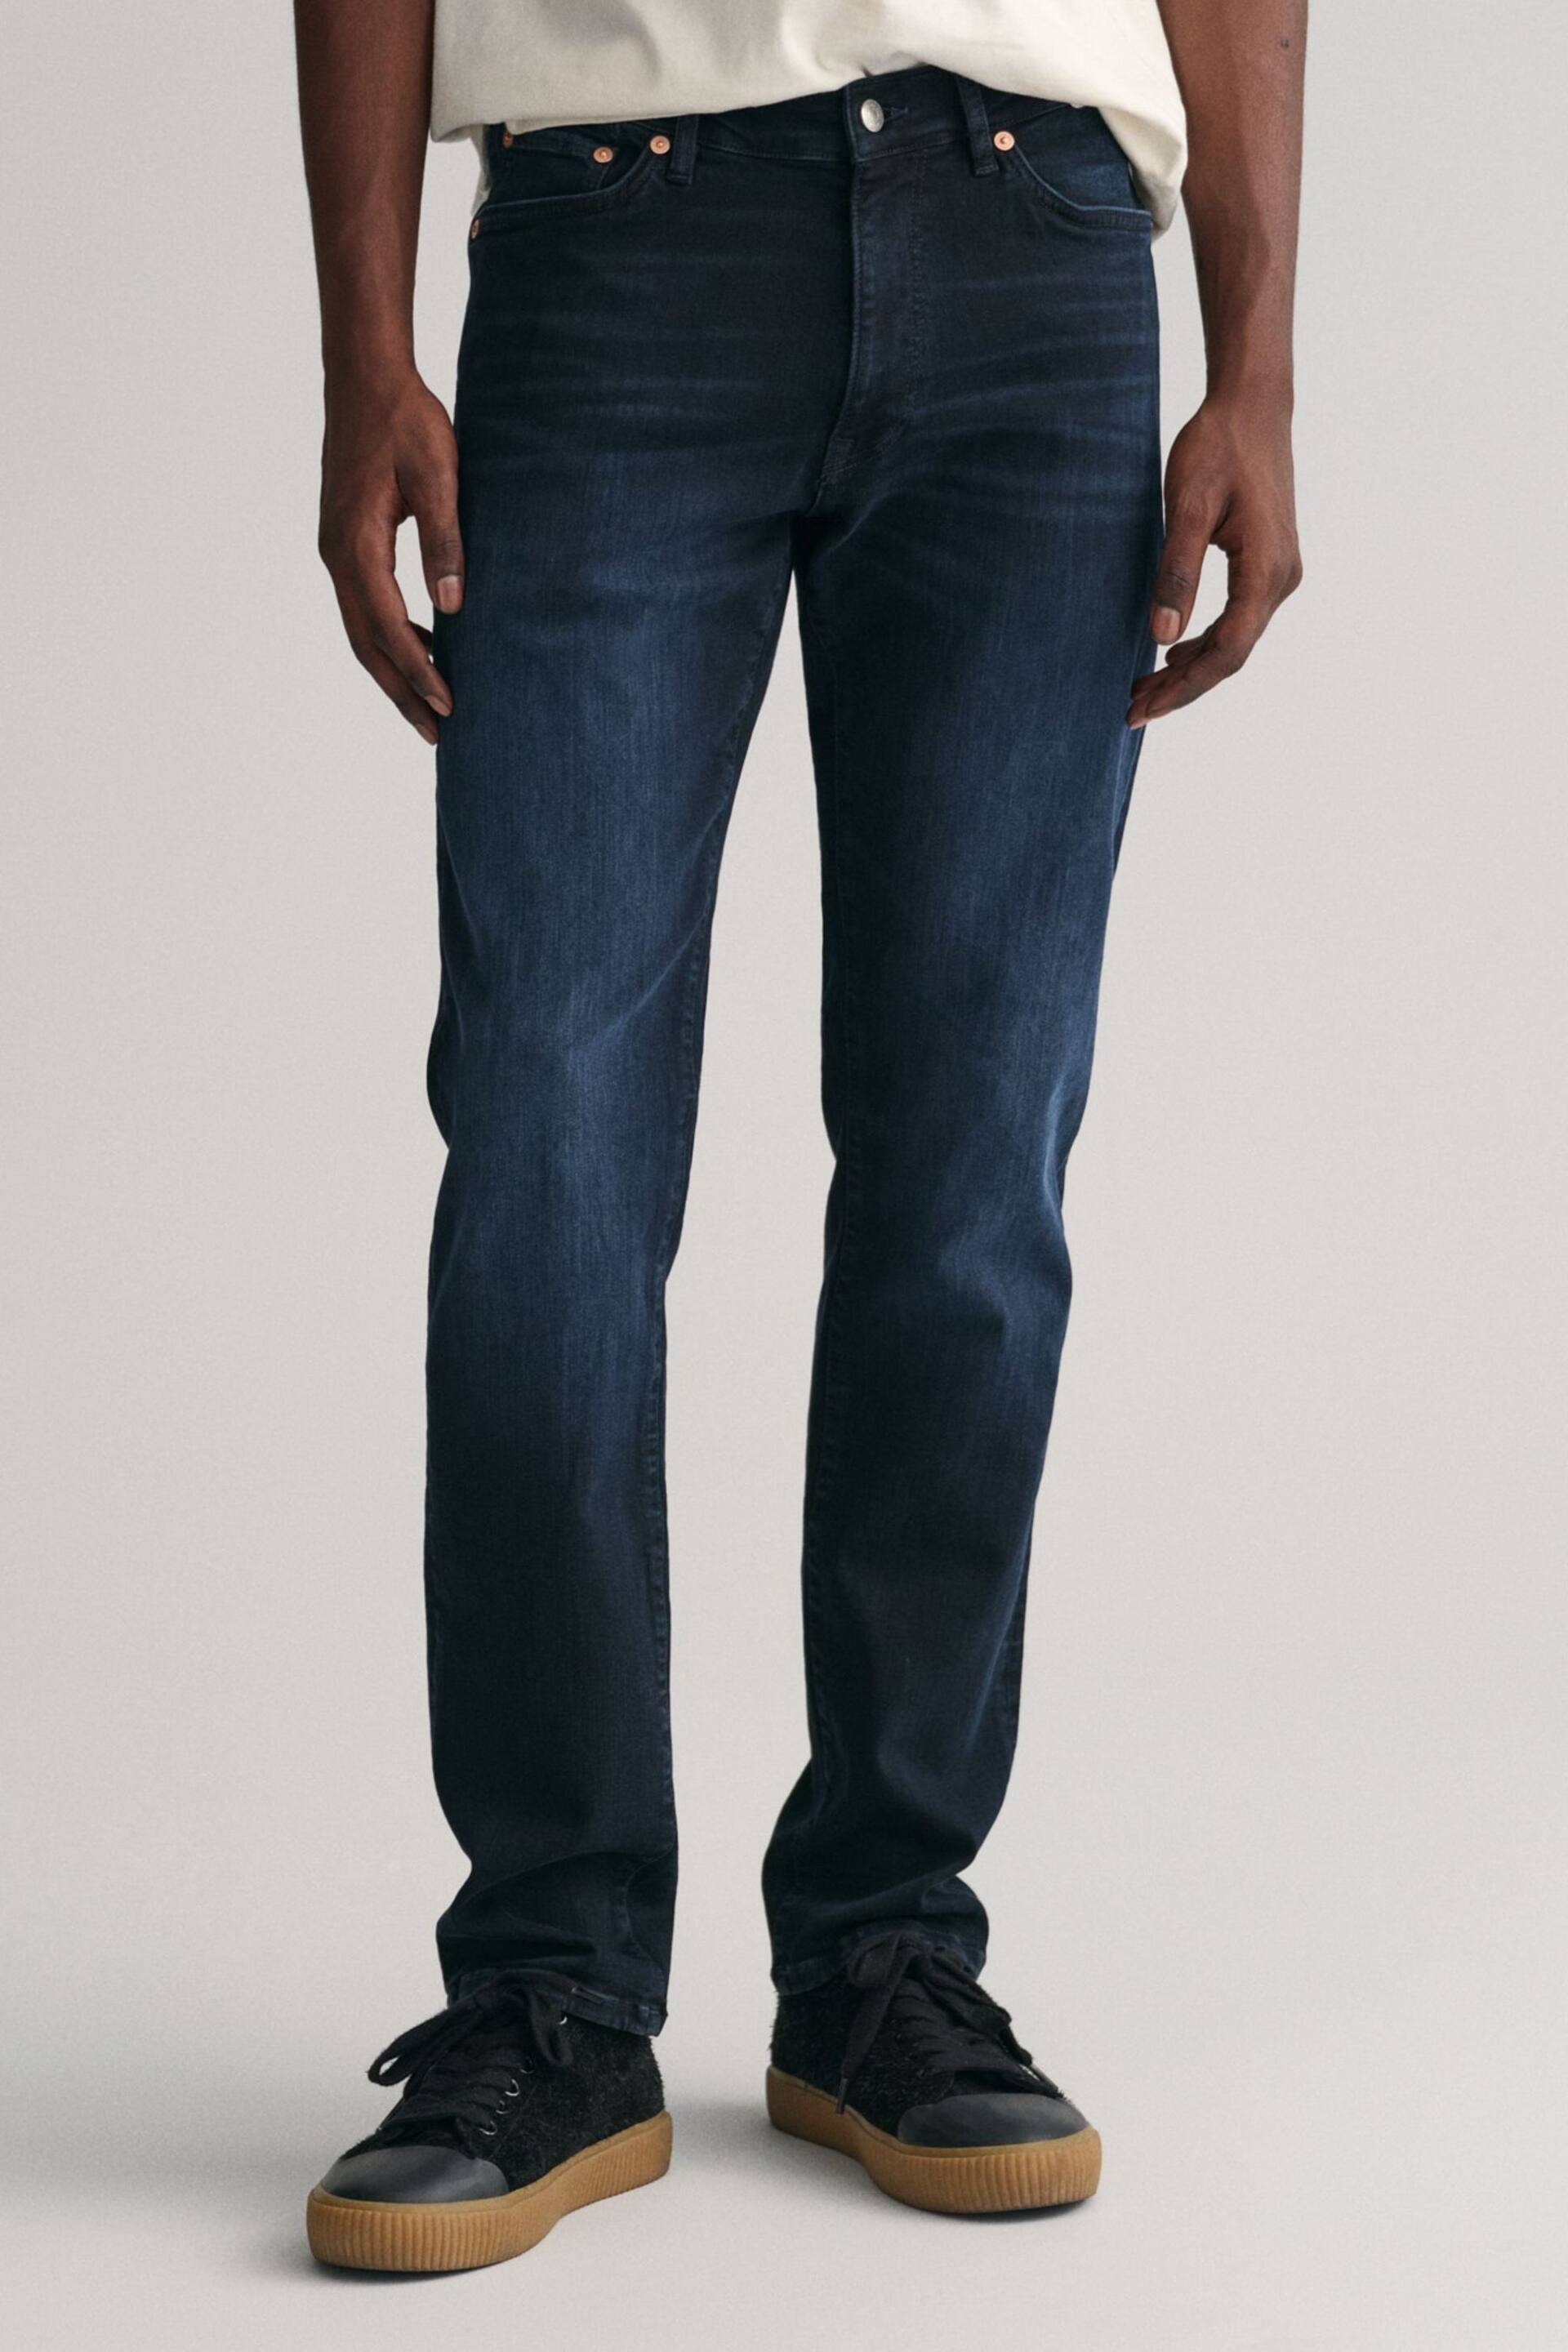 GANT Extra Slim Fit Active Recover Stretch Black Jeans - Image 1 of 5